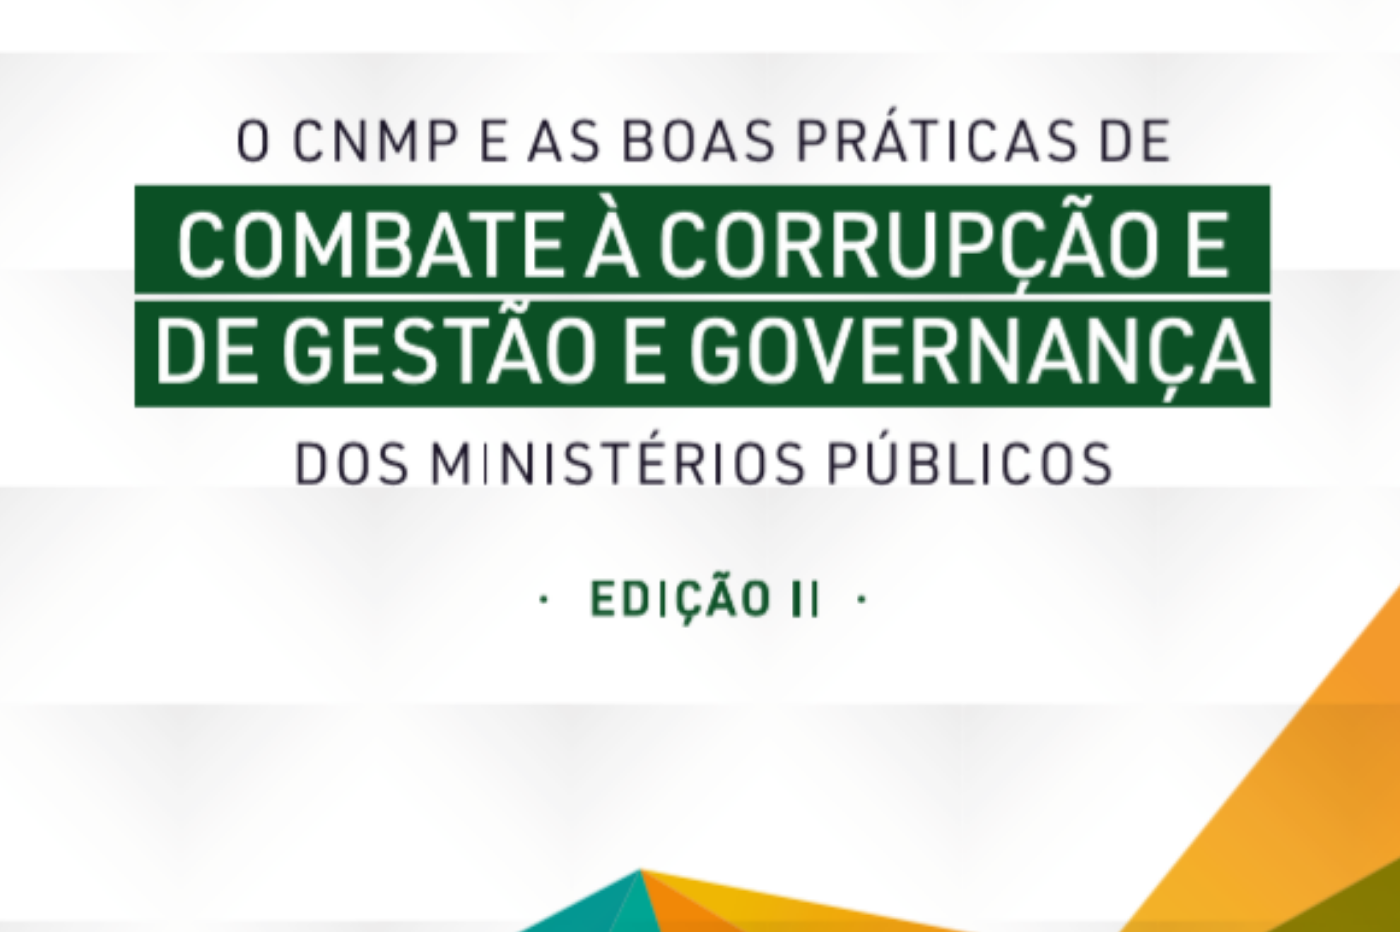 banner_combate_corrupcao.png - 312,16 kB